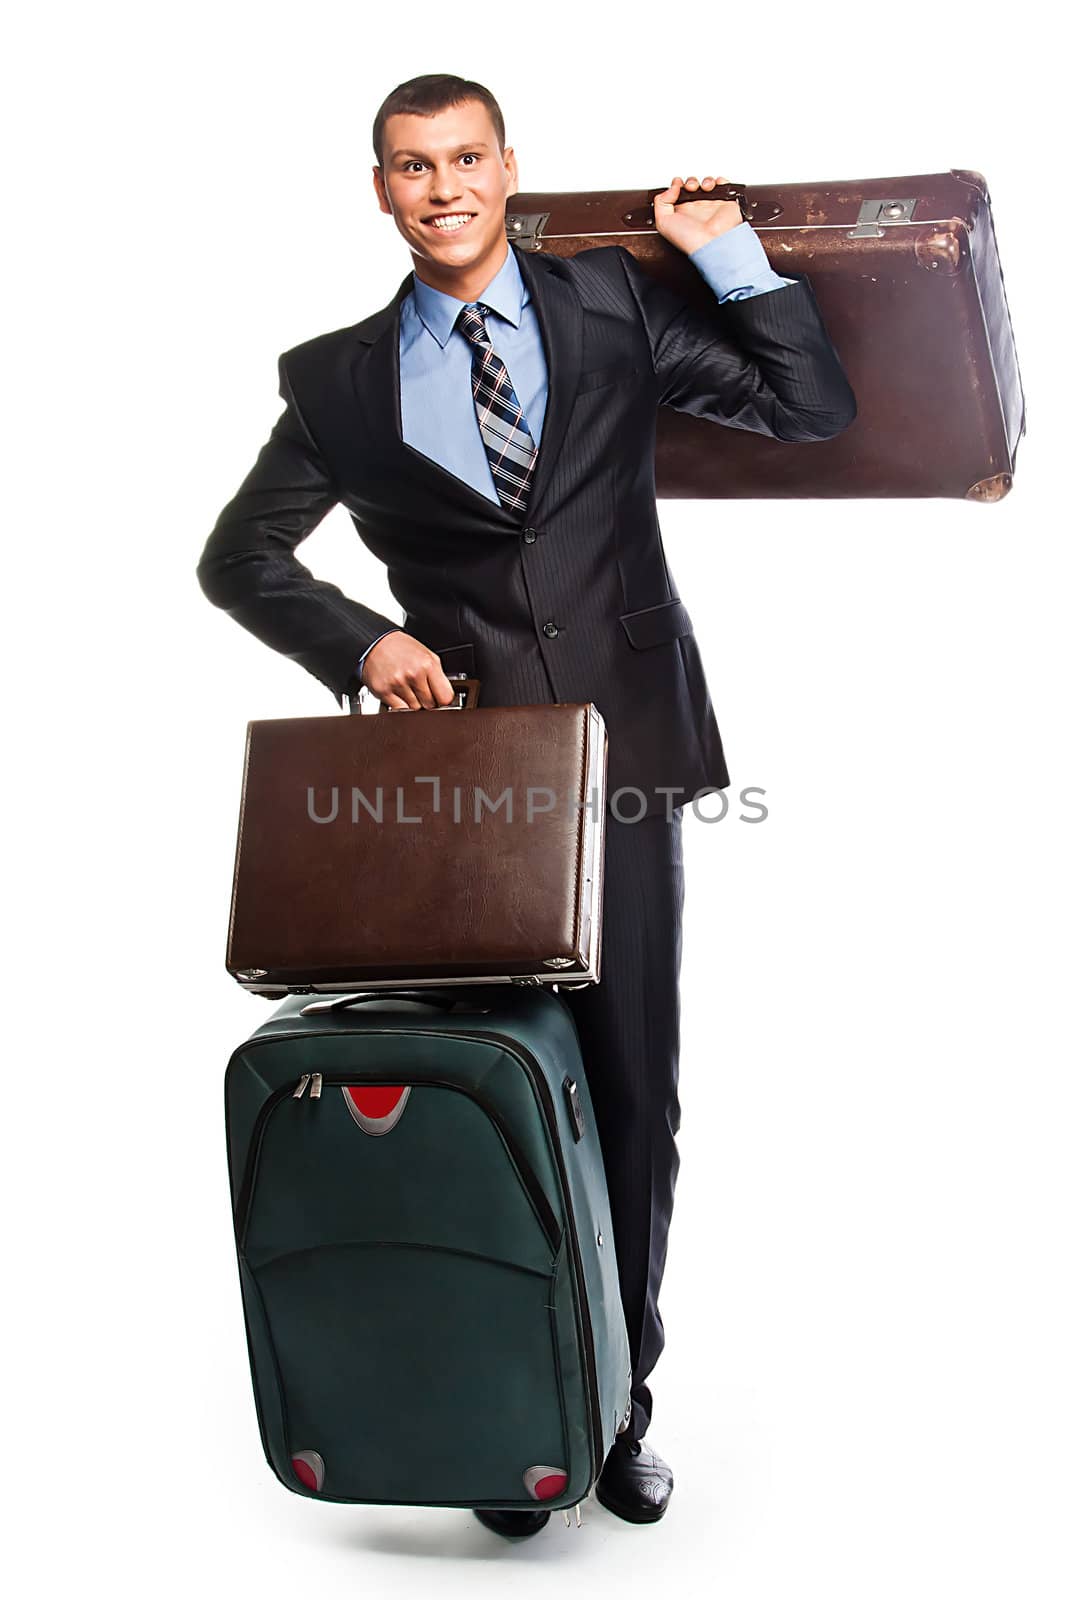 Young successful businessman in a business suit with three suitcases and a journey